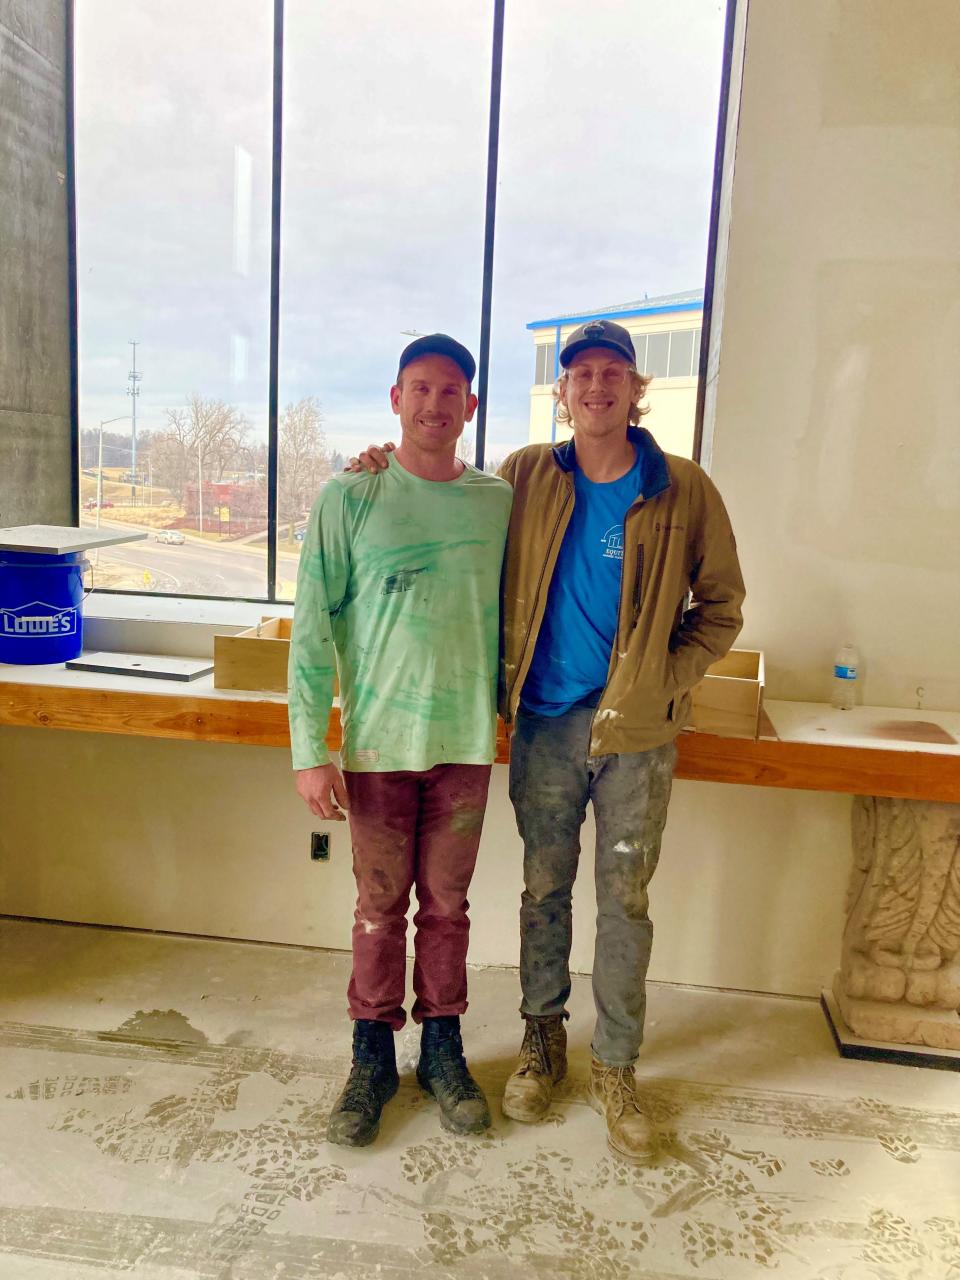 Matt and Michael Jennings stand in the space that will be their father's condominium when the work converting the former Delaware County Justice Center to luxury dwellings is completed. The work has been ongoing for more than a year. The brother say now it should be finished by the end of 2023.